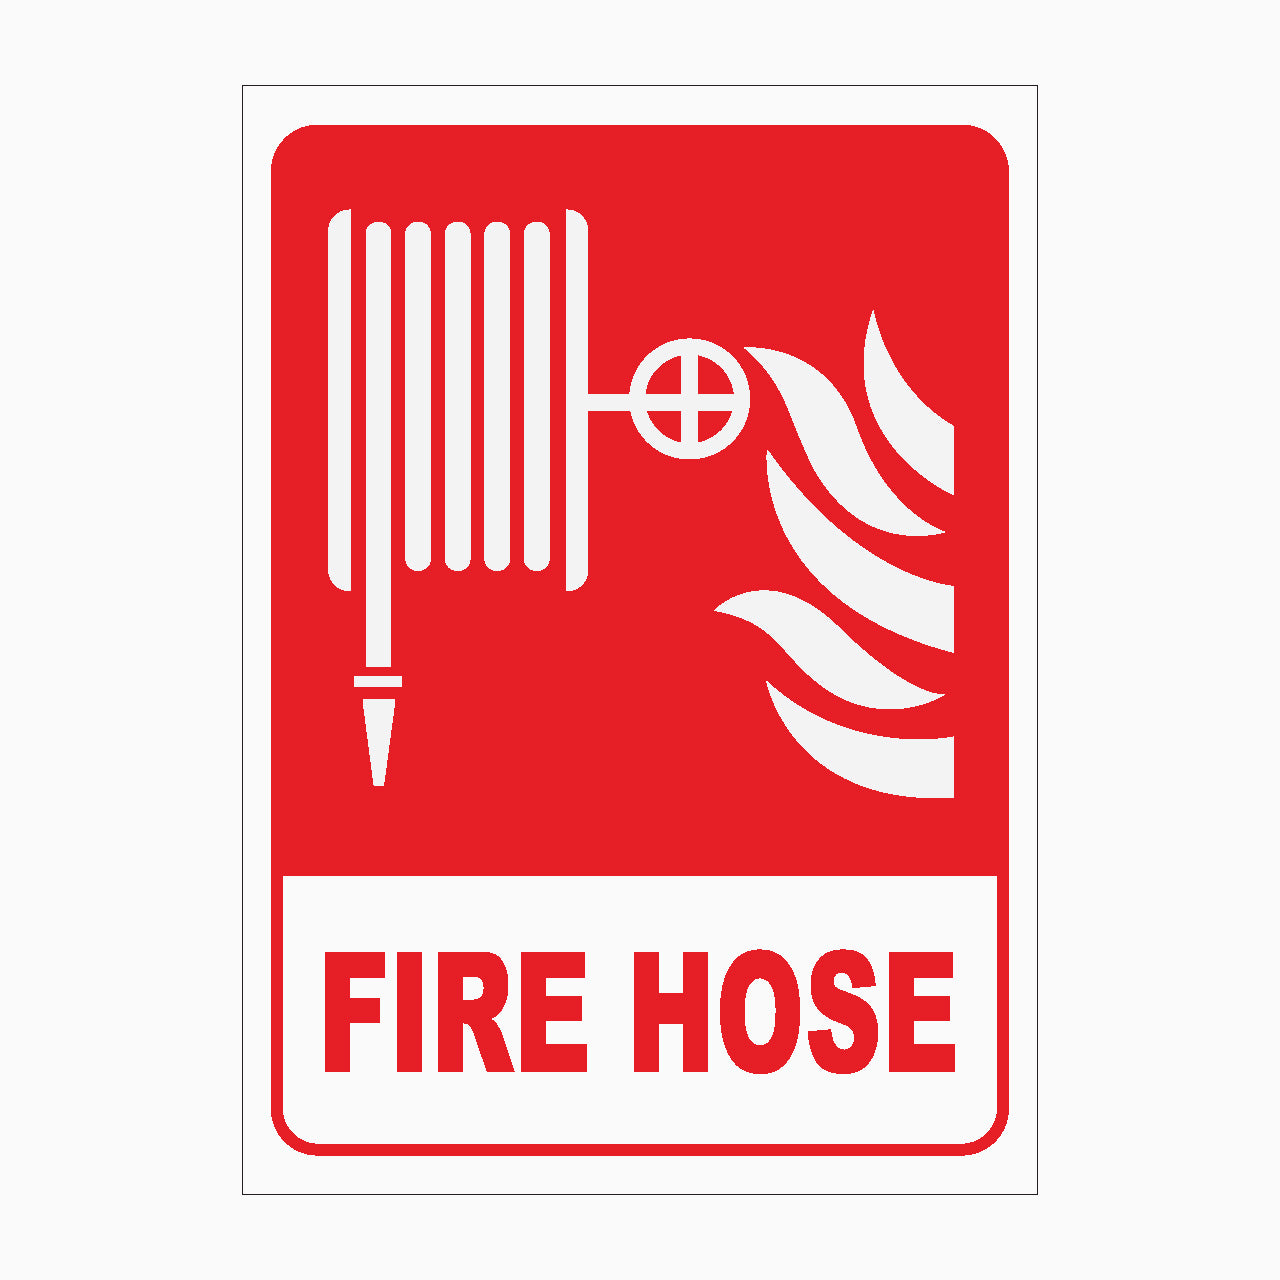 FIRE HOSE SIGN - FIRE SAFETY SIGNS - STATUTORY SIGNS - SHOP ONLINE